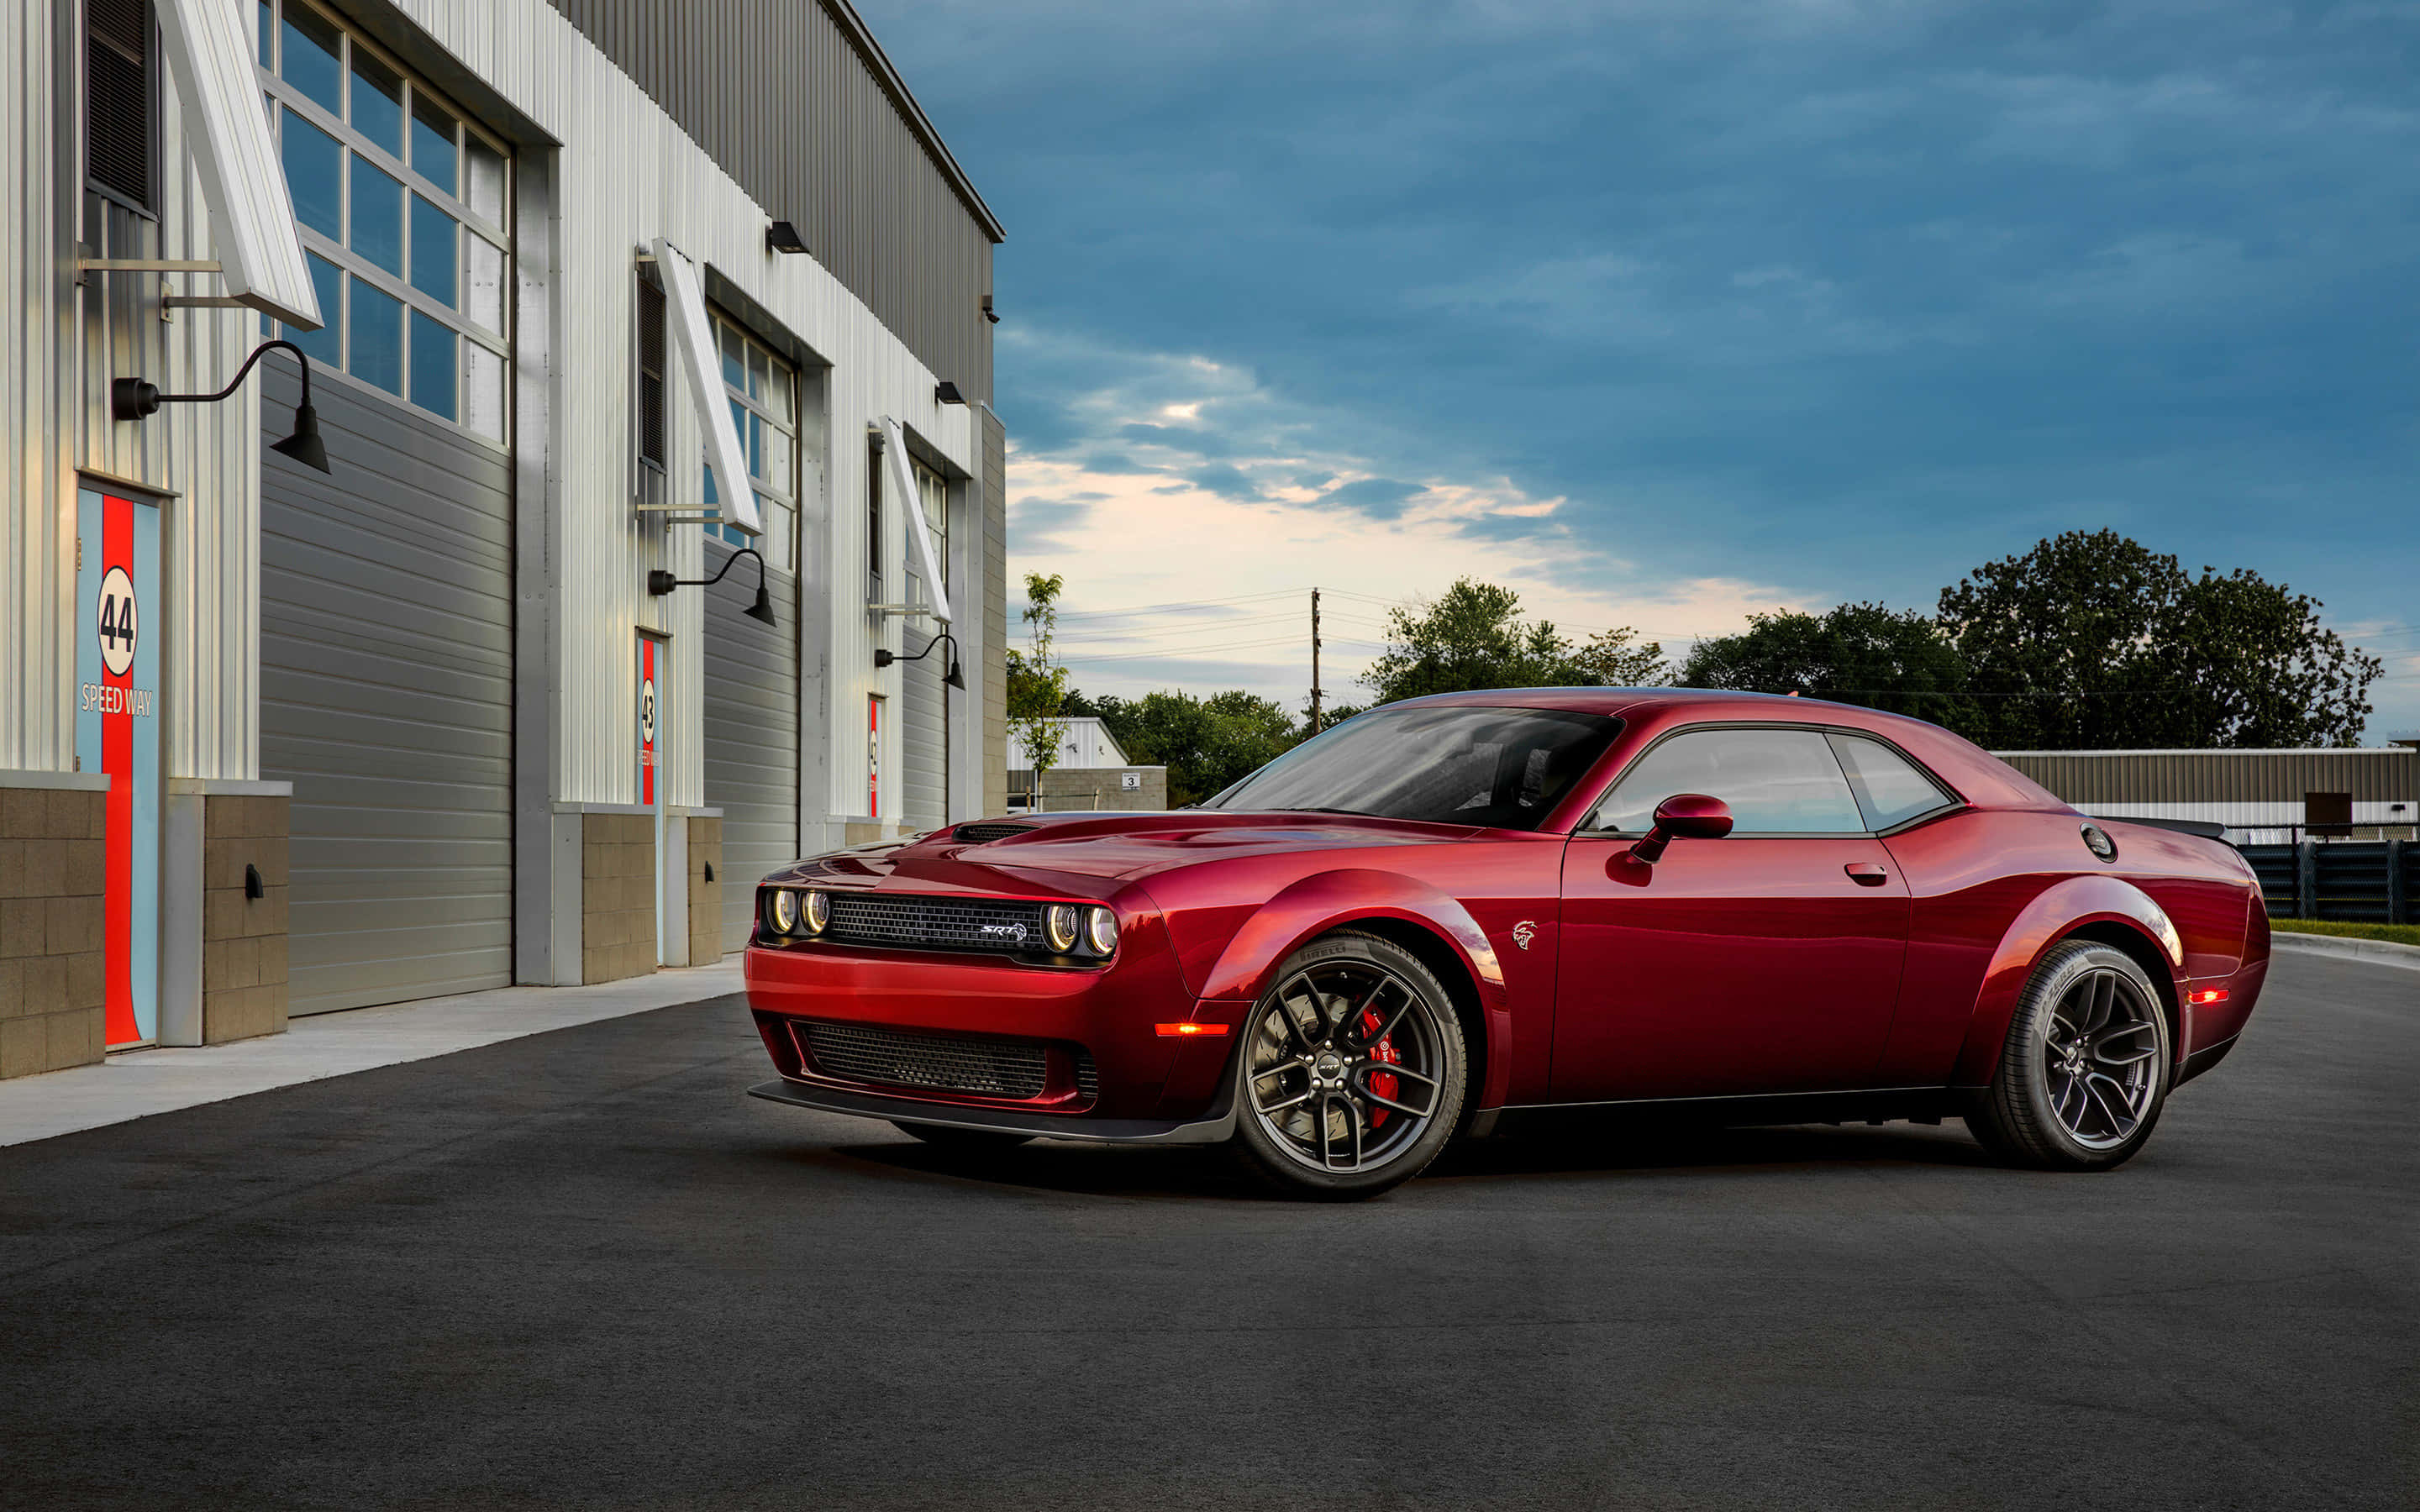 Unleash the Beast: Experience a Powerful and High-Performance Ride with the Dodge Hellcat Wallpaper